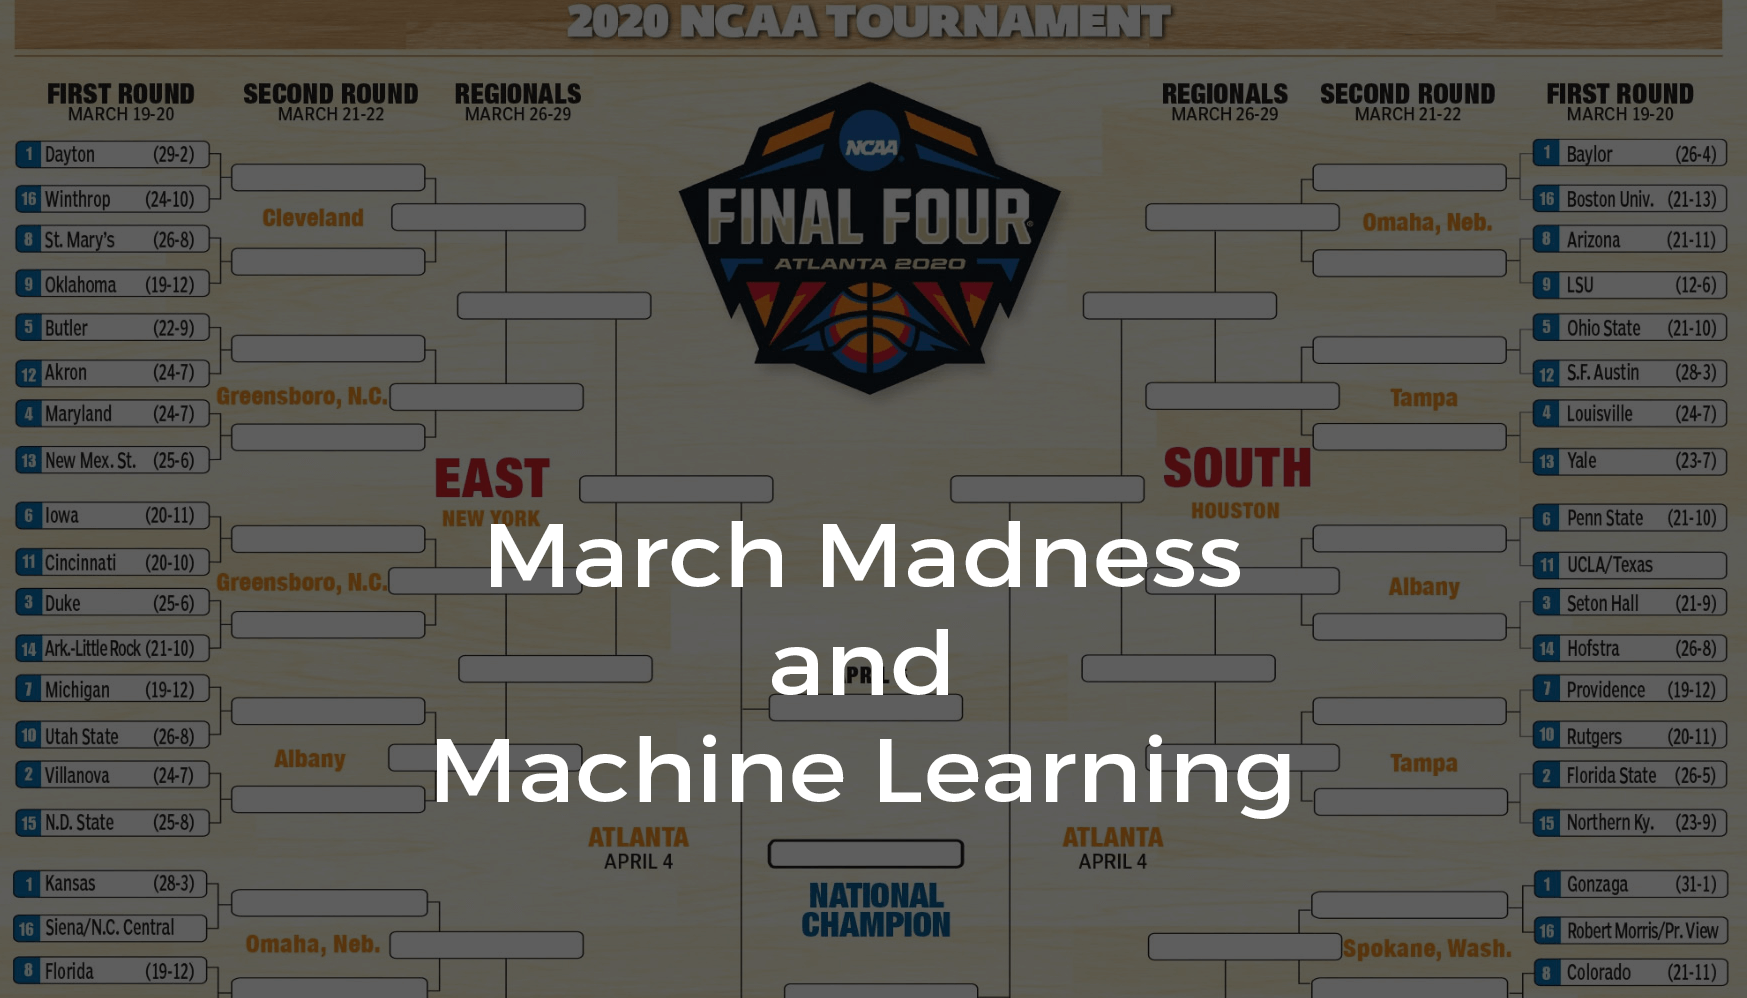 March Madness and Machine Learning